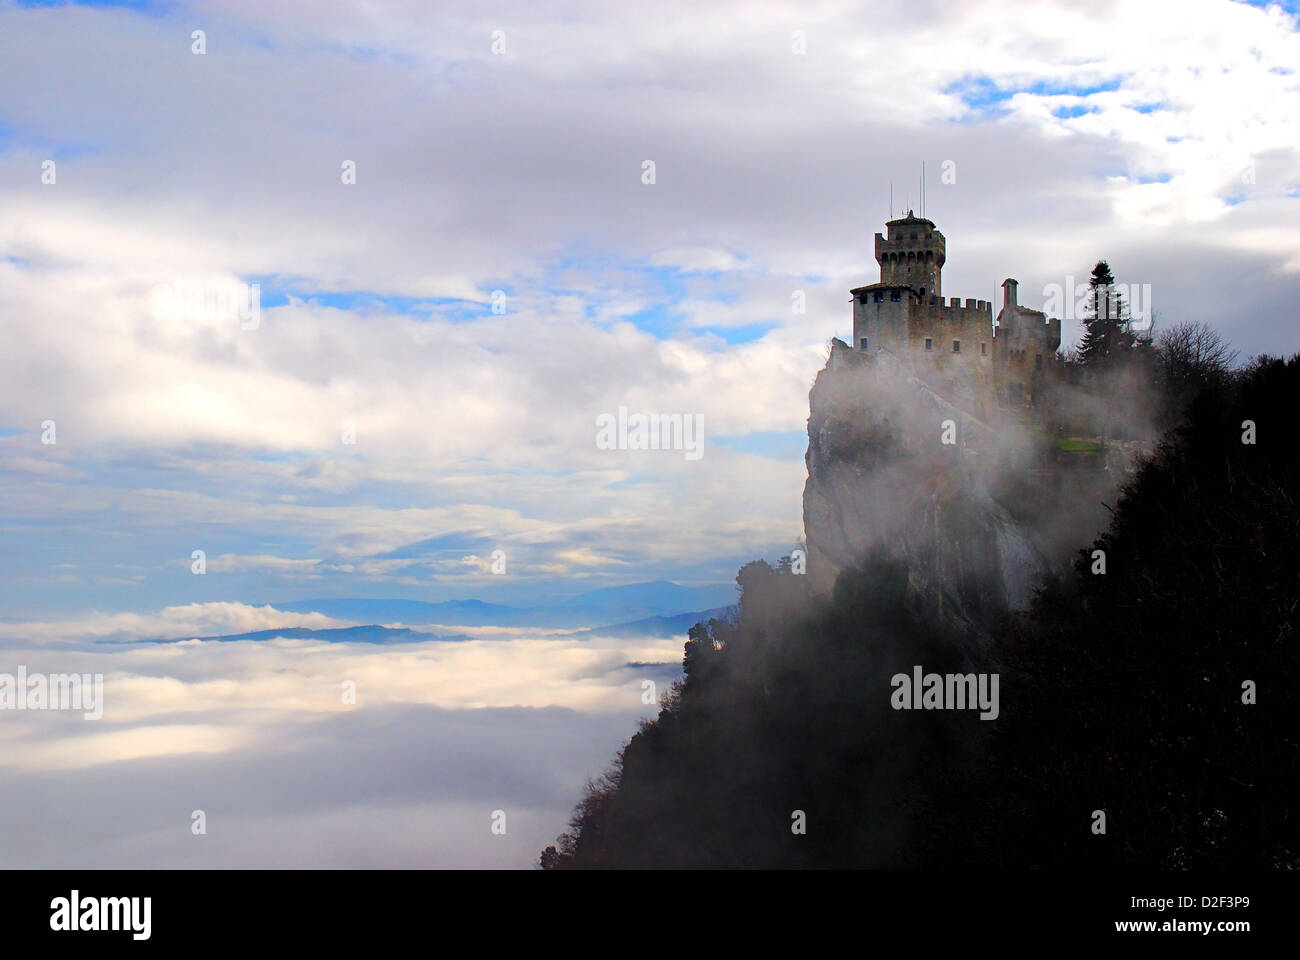 Serenissima Repubblica di San Marino. January 21, 2013 , The territory of San Marino Republic was covered up with a thick coat of clouds. Only the towers on Mount Titano pierced  the clouds. Credit: Ferdinando Piezzi Stock Photo